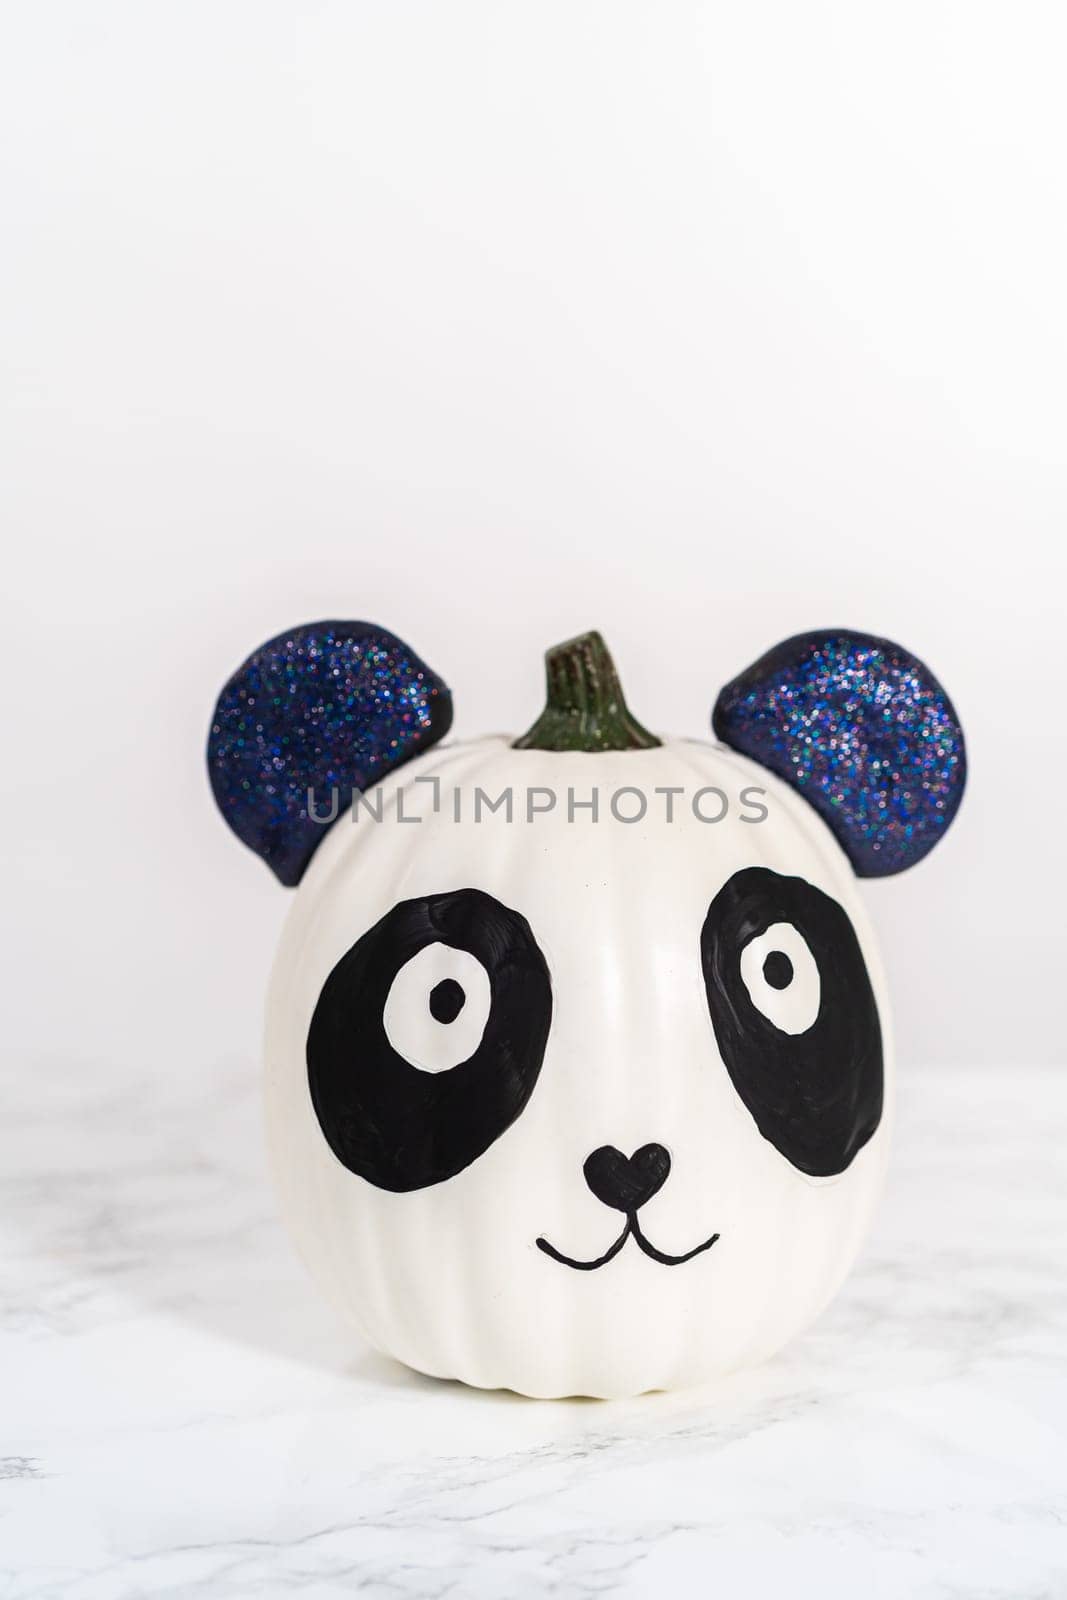 Panda pumpkin with glittery ears for Halloween on a white background.